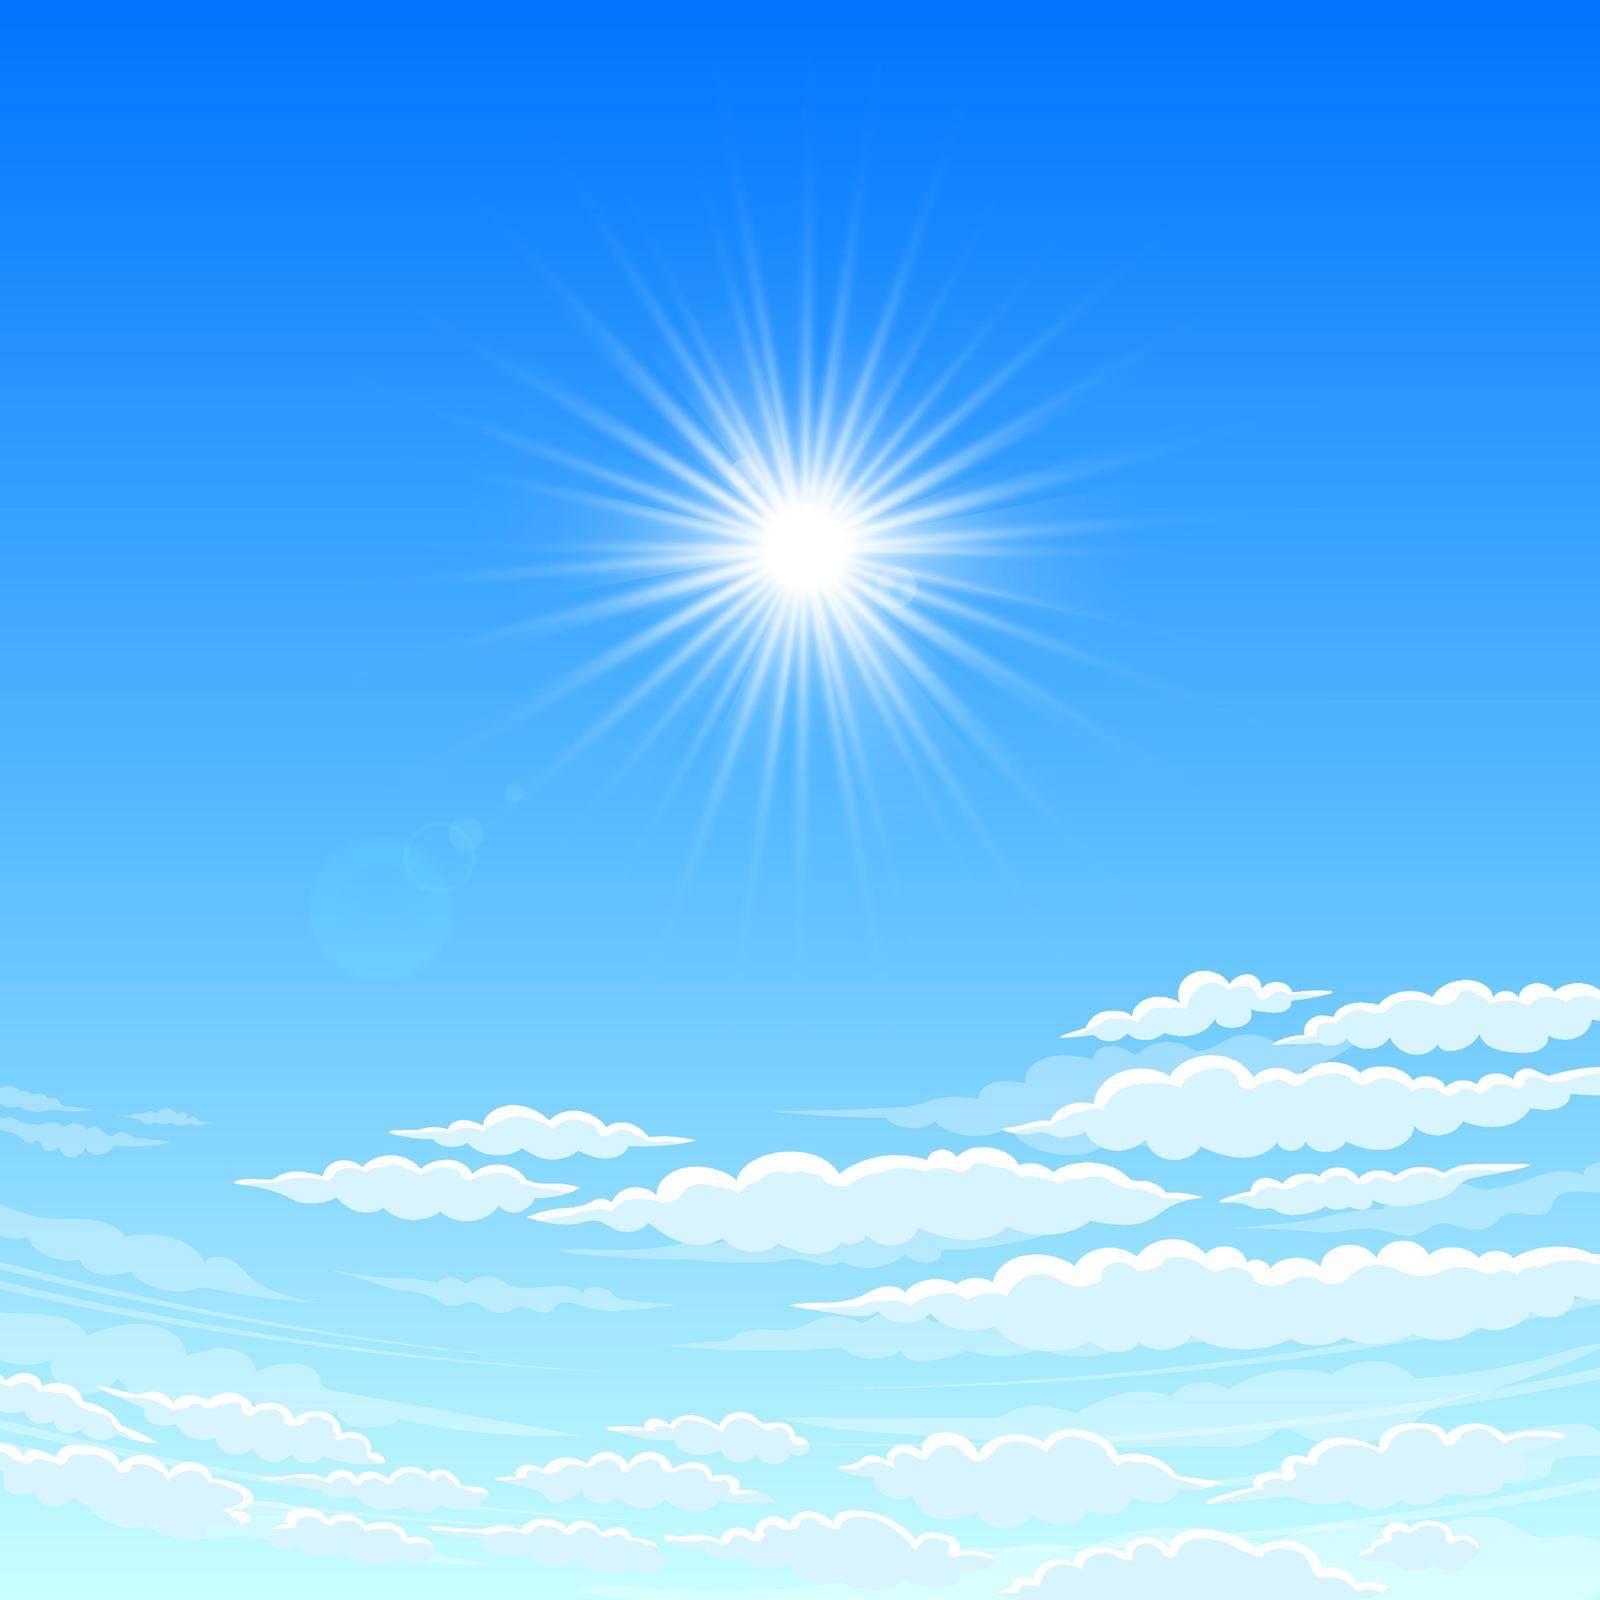 Sky, cloudy day And the sun shining. Vector Sky Background by samarttiw